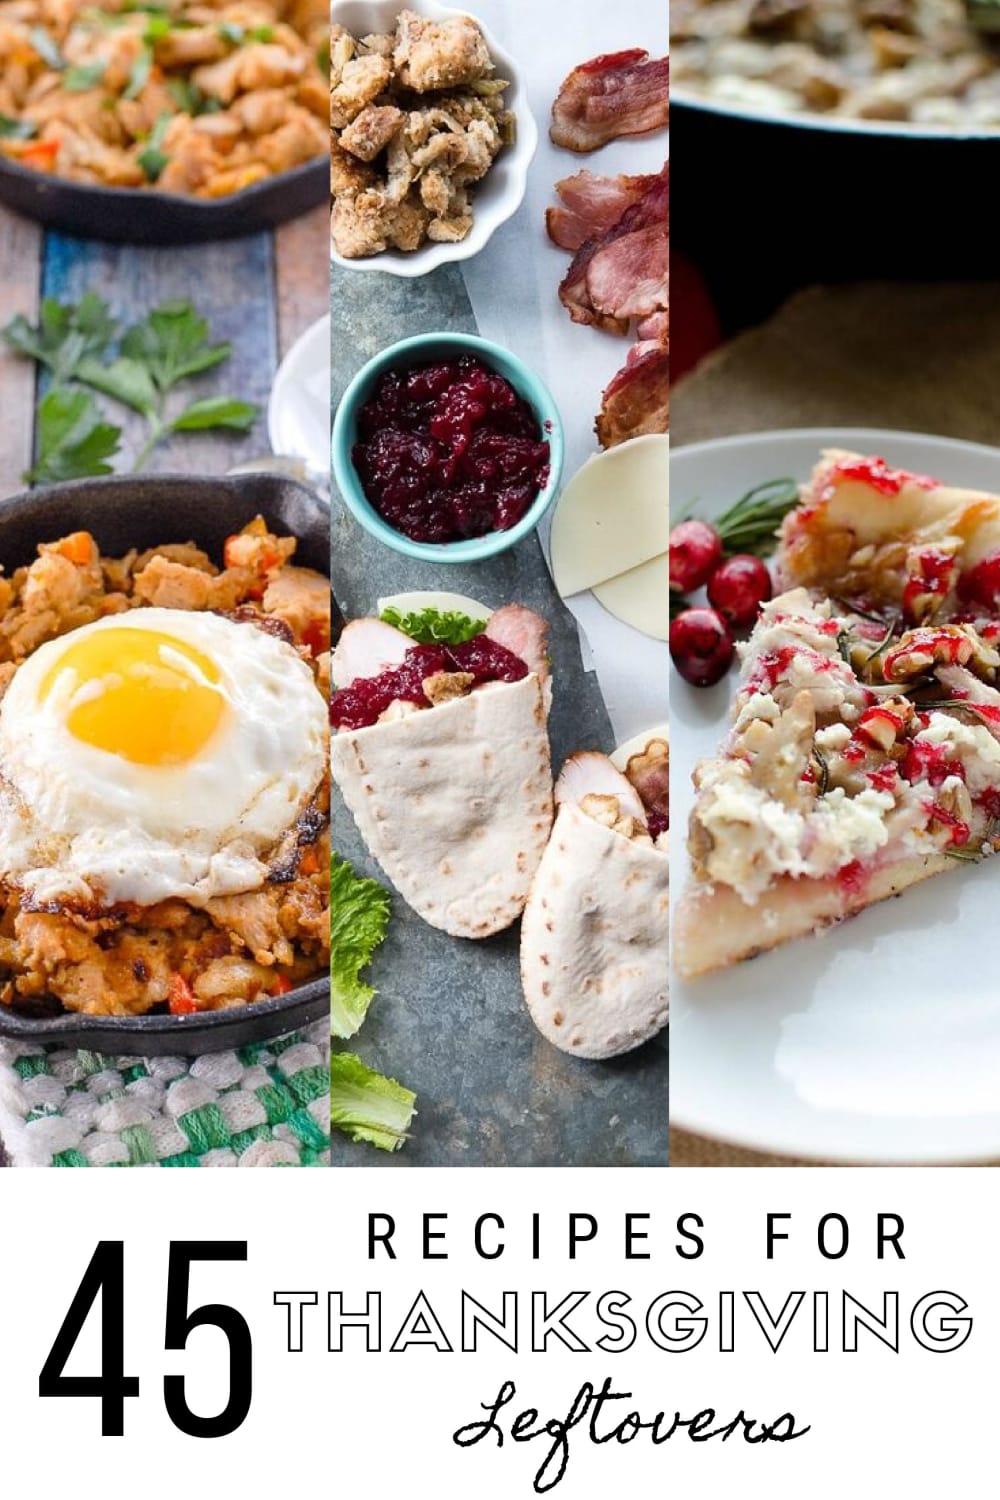 45 Recipes for Your Thanksgiving Leftovers